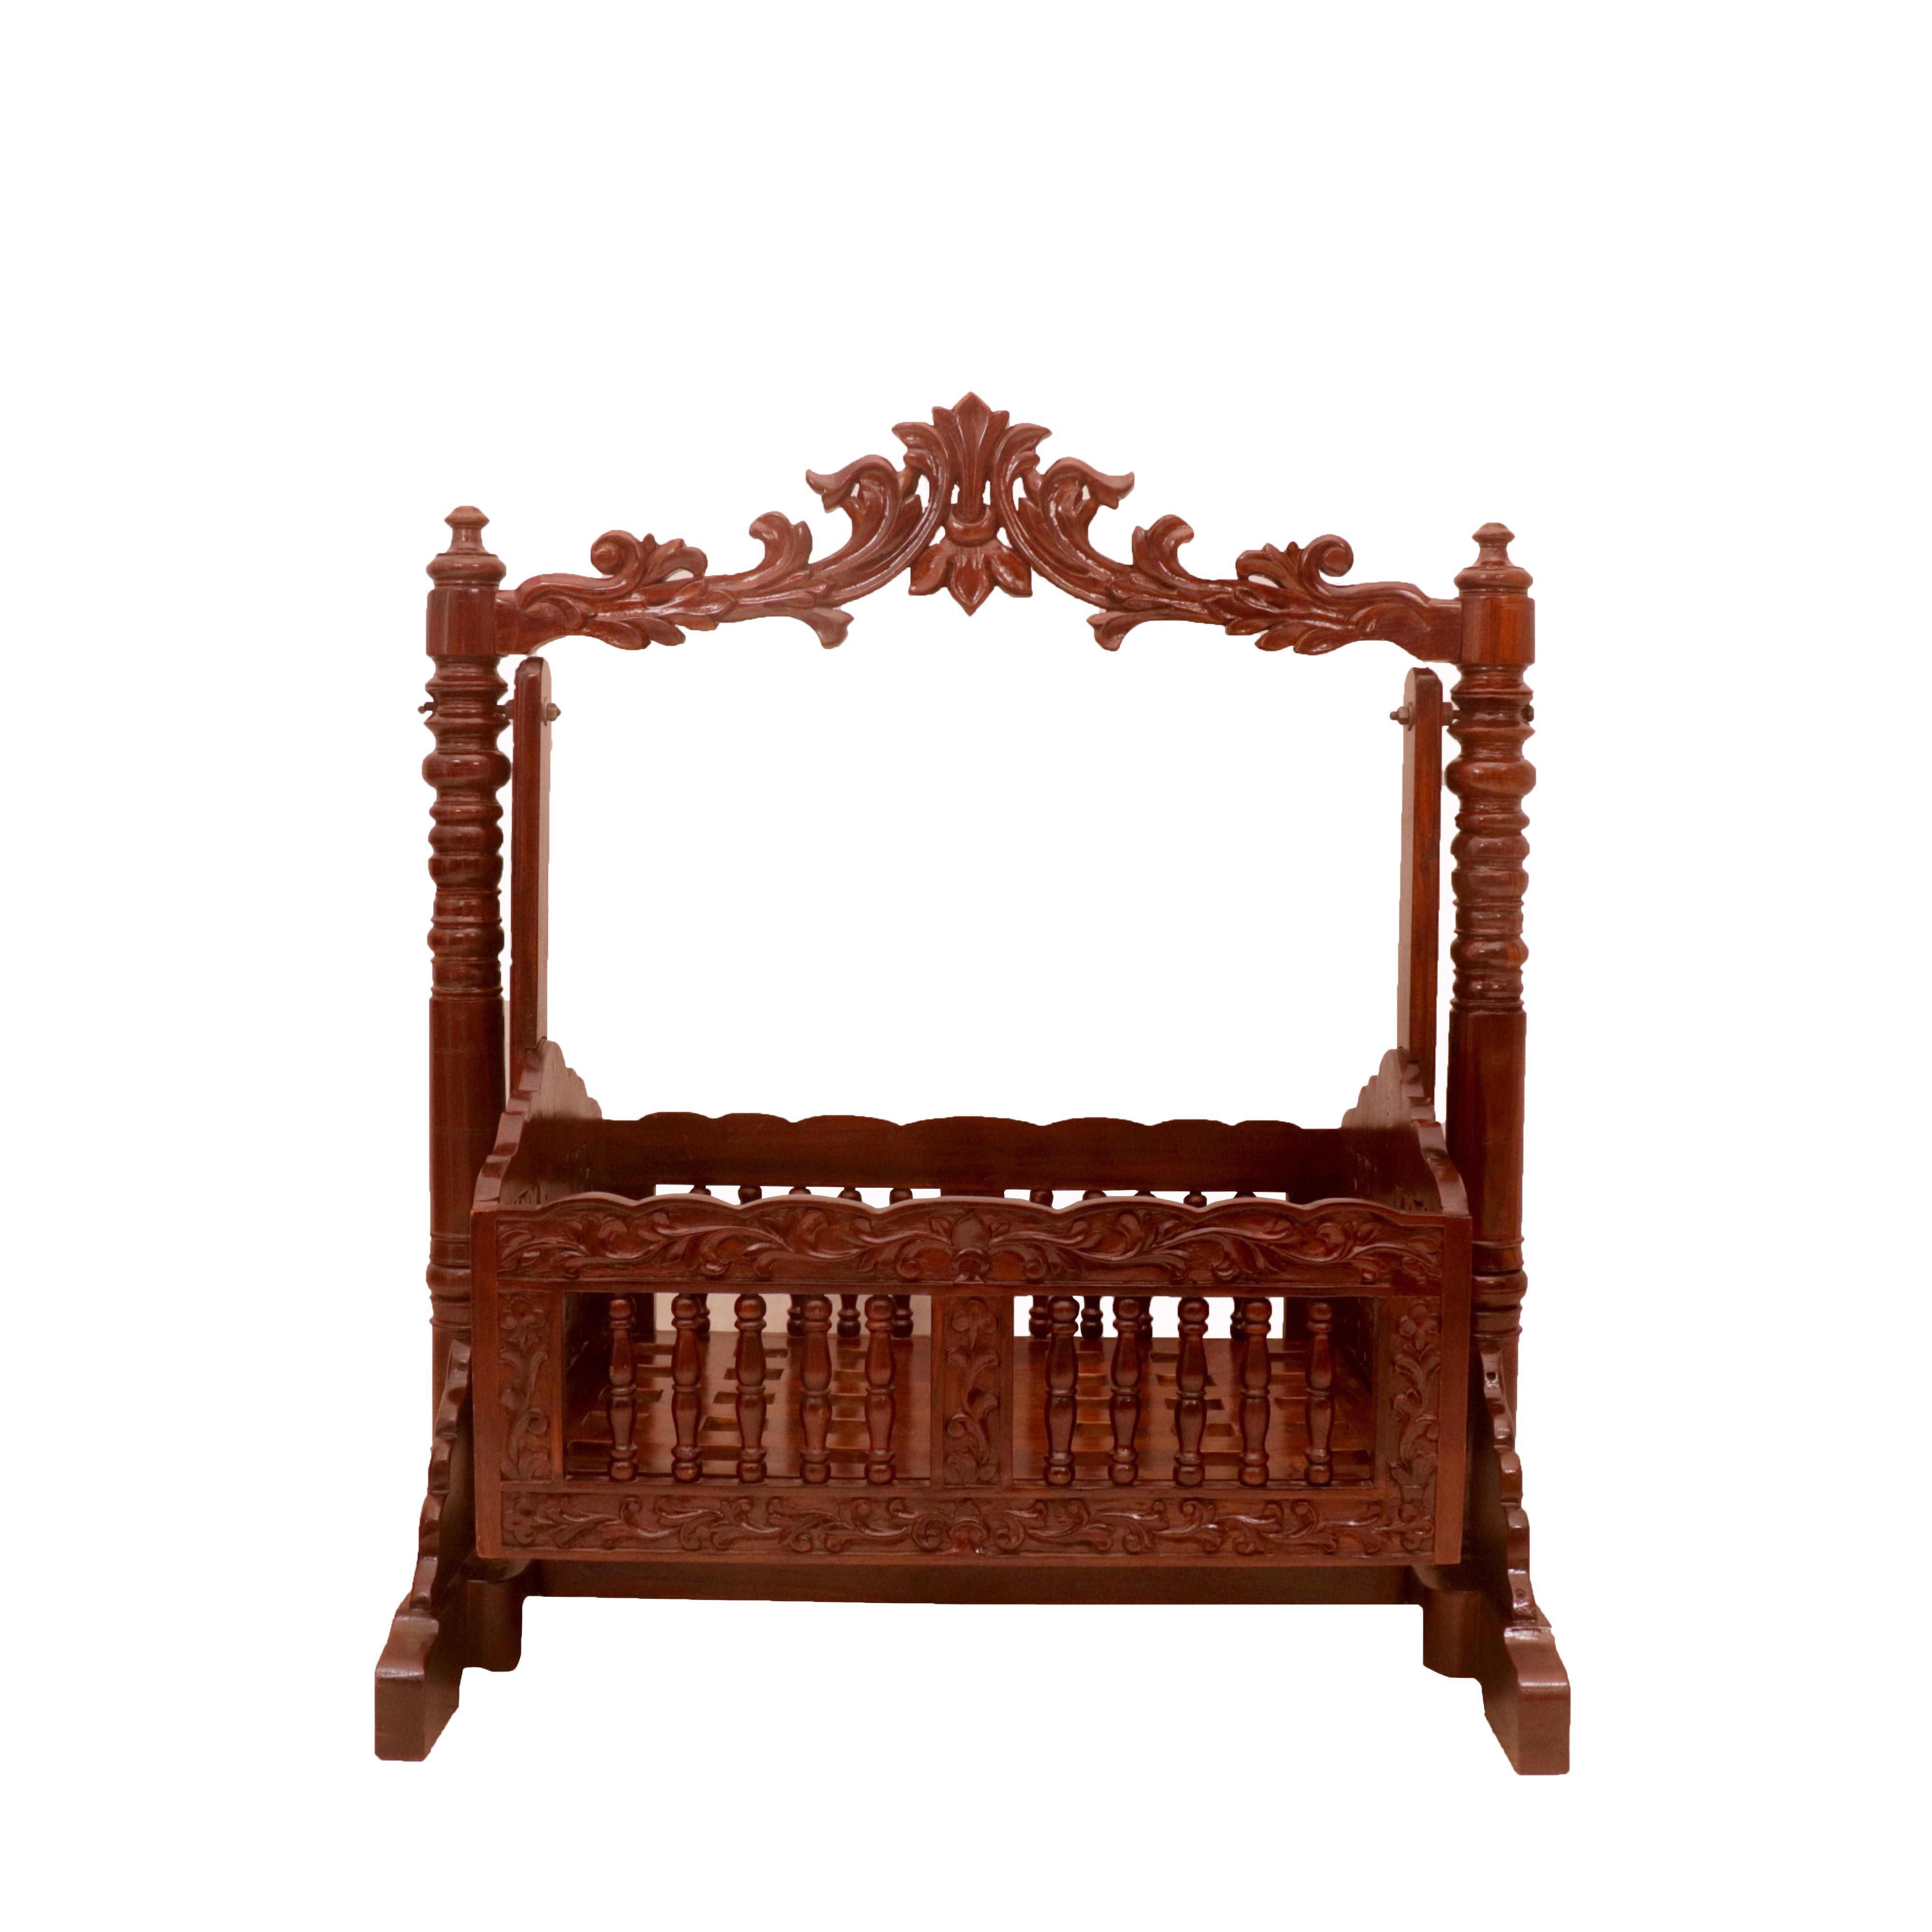 Intricately Carved Wooden Crib Cradle